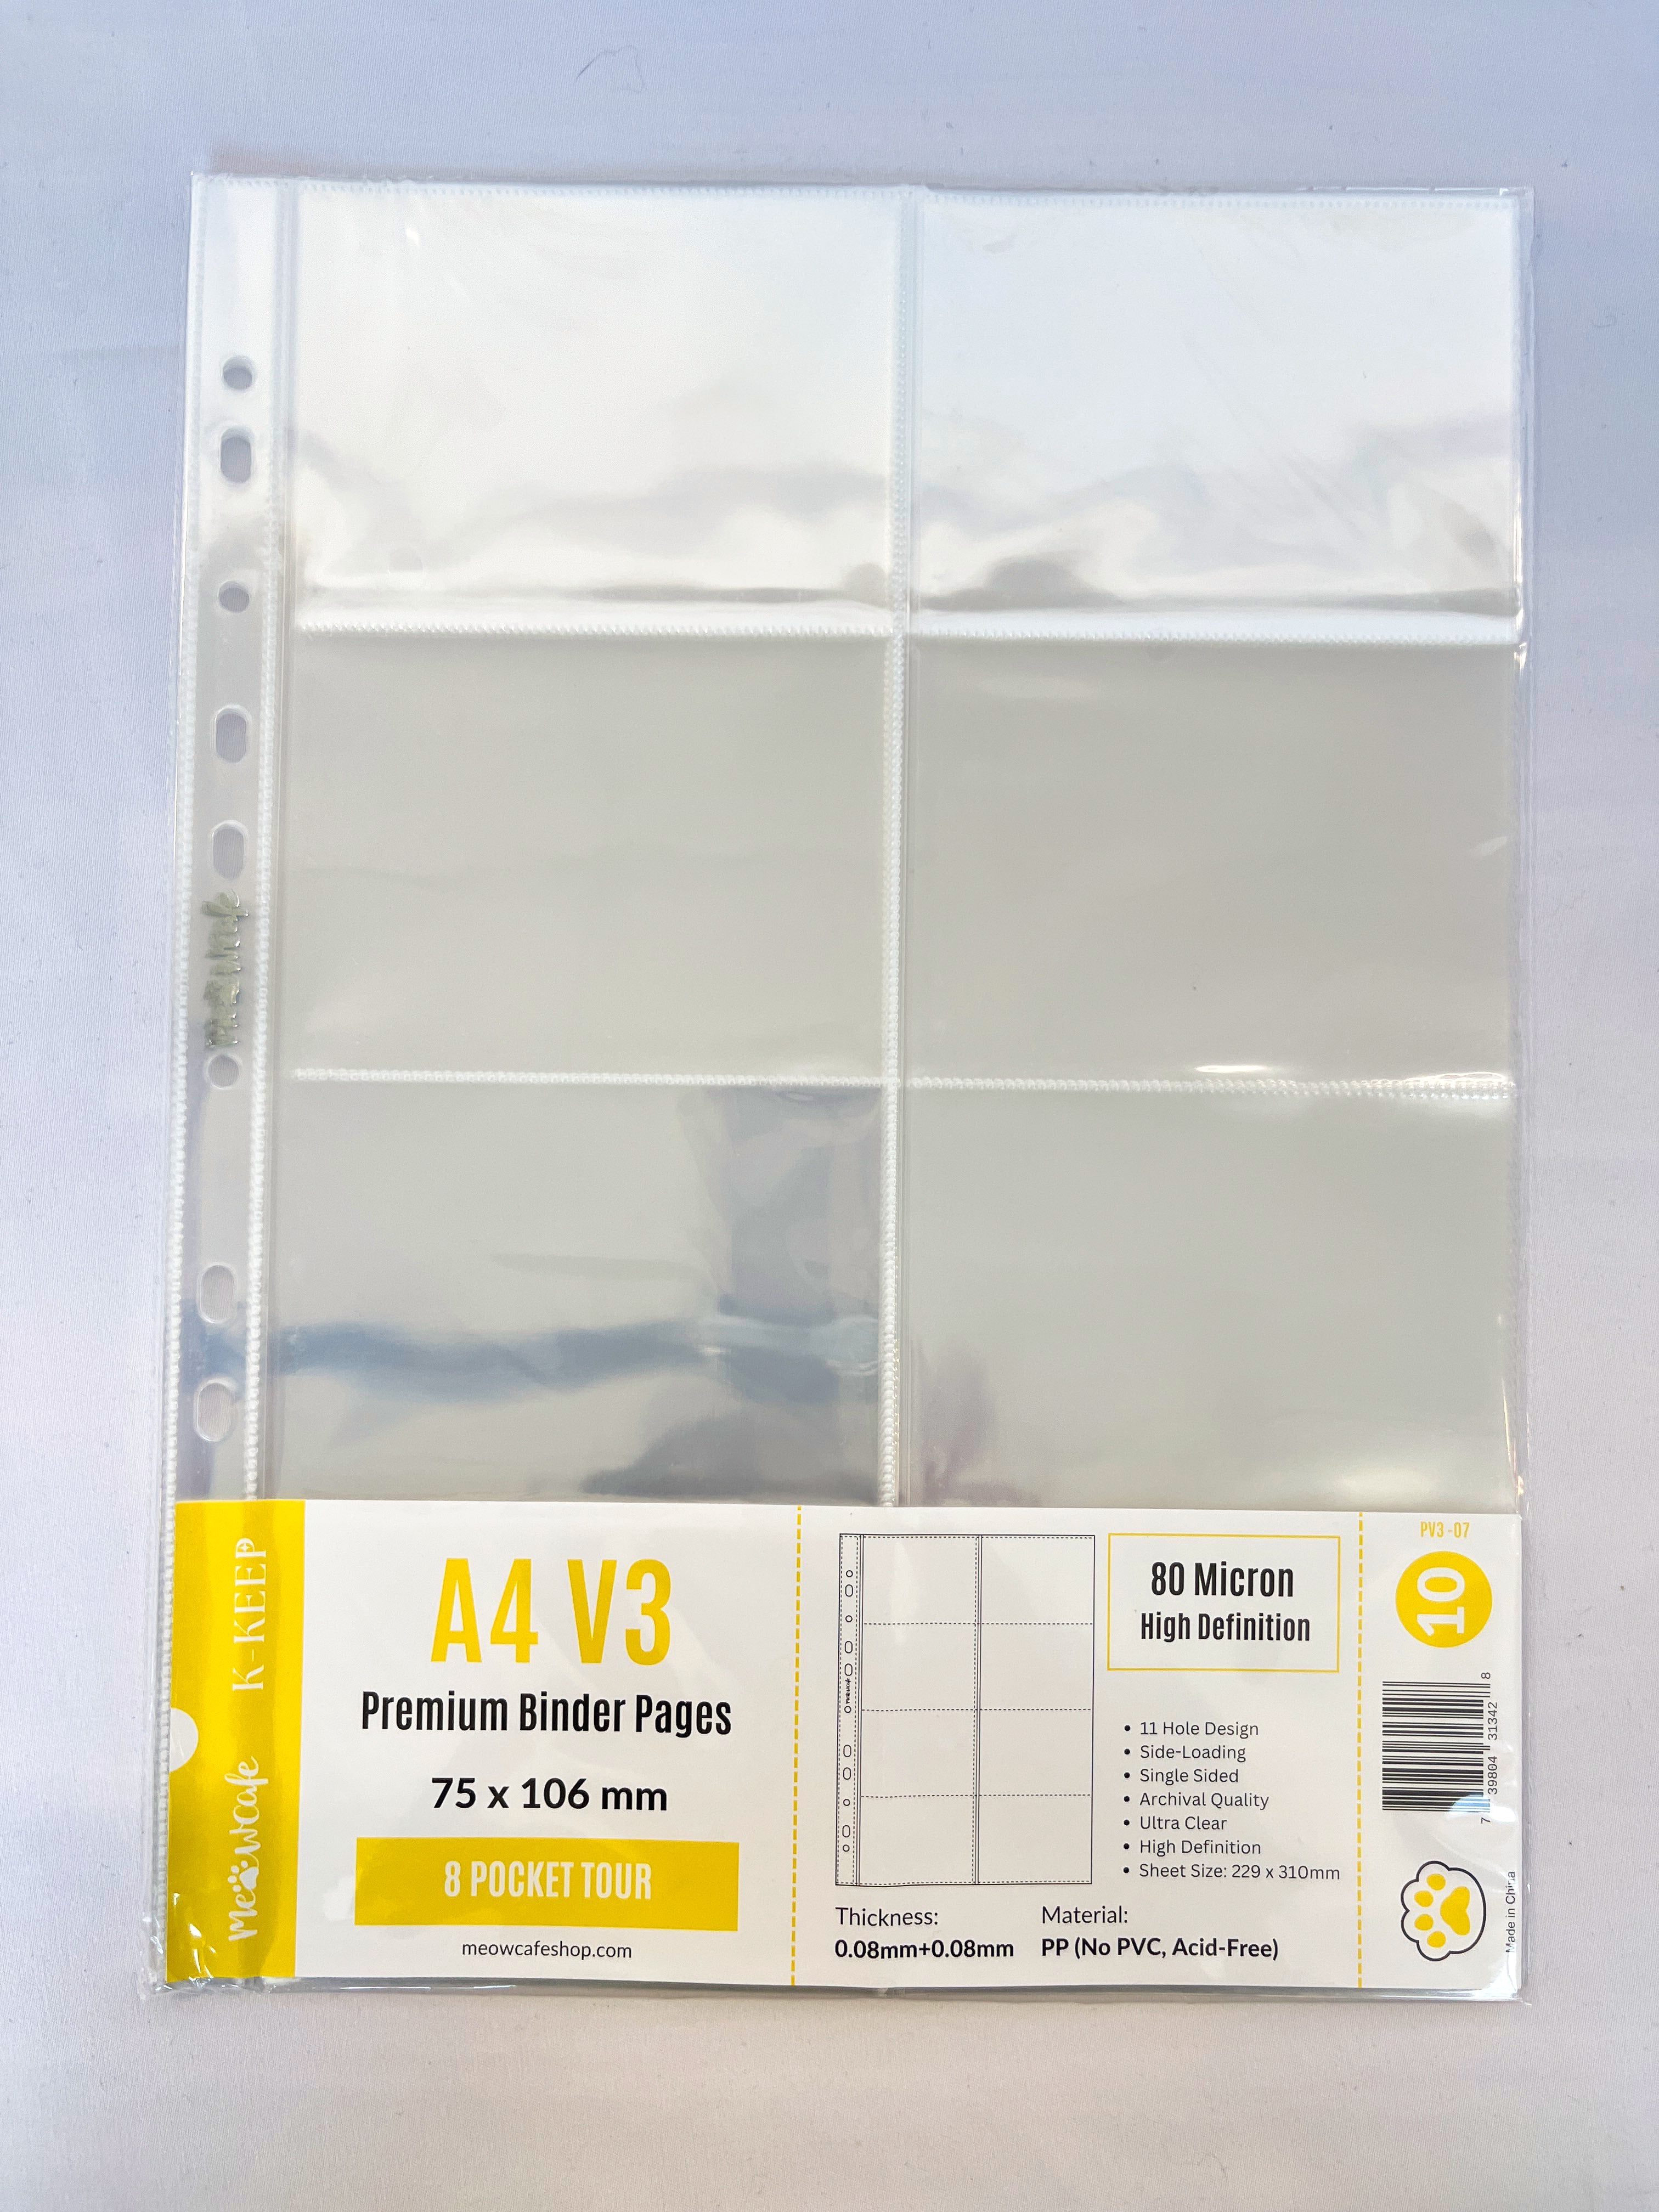 K-KEEP [A4 V3] -  8 Pocket (Tour) - 11 Holes Premium Binder Pages, 80 Micron Thick, High Definition (Pack of 10) - (PV3-07)